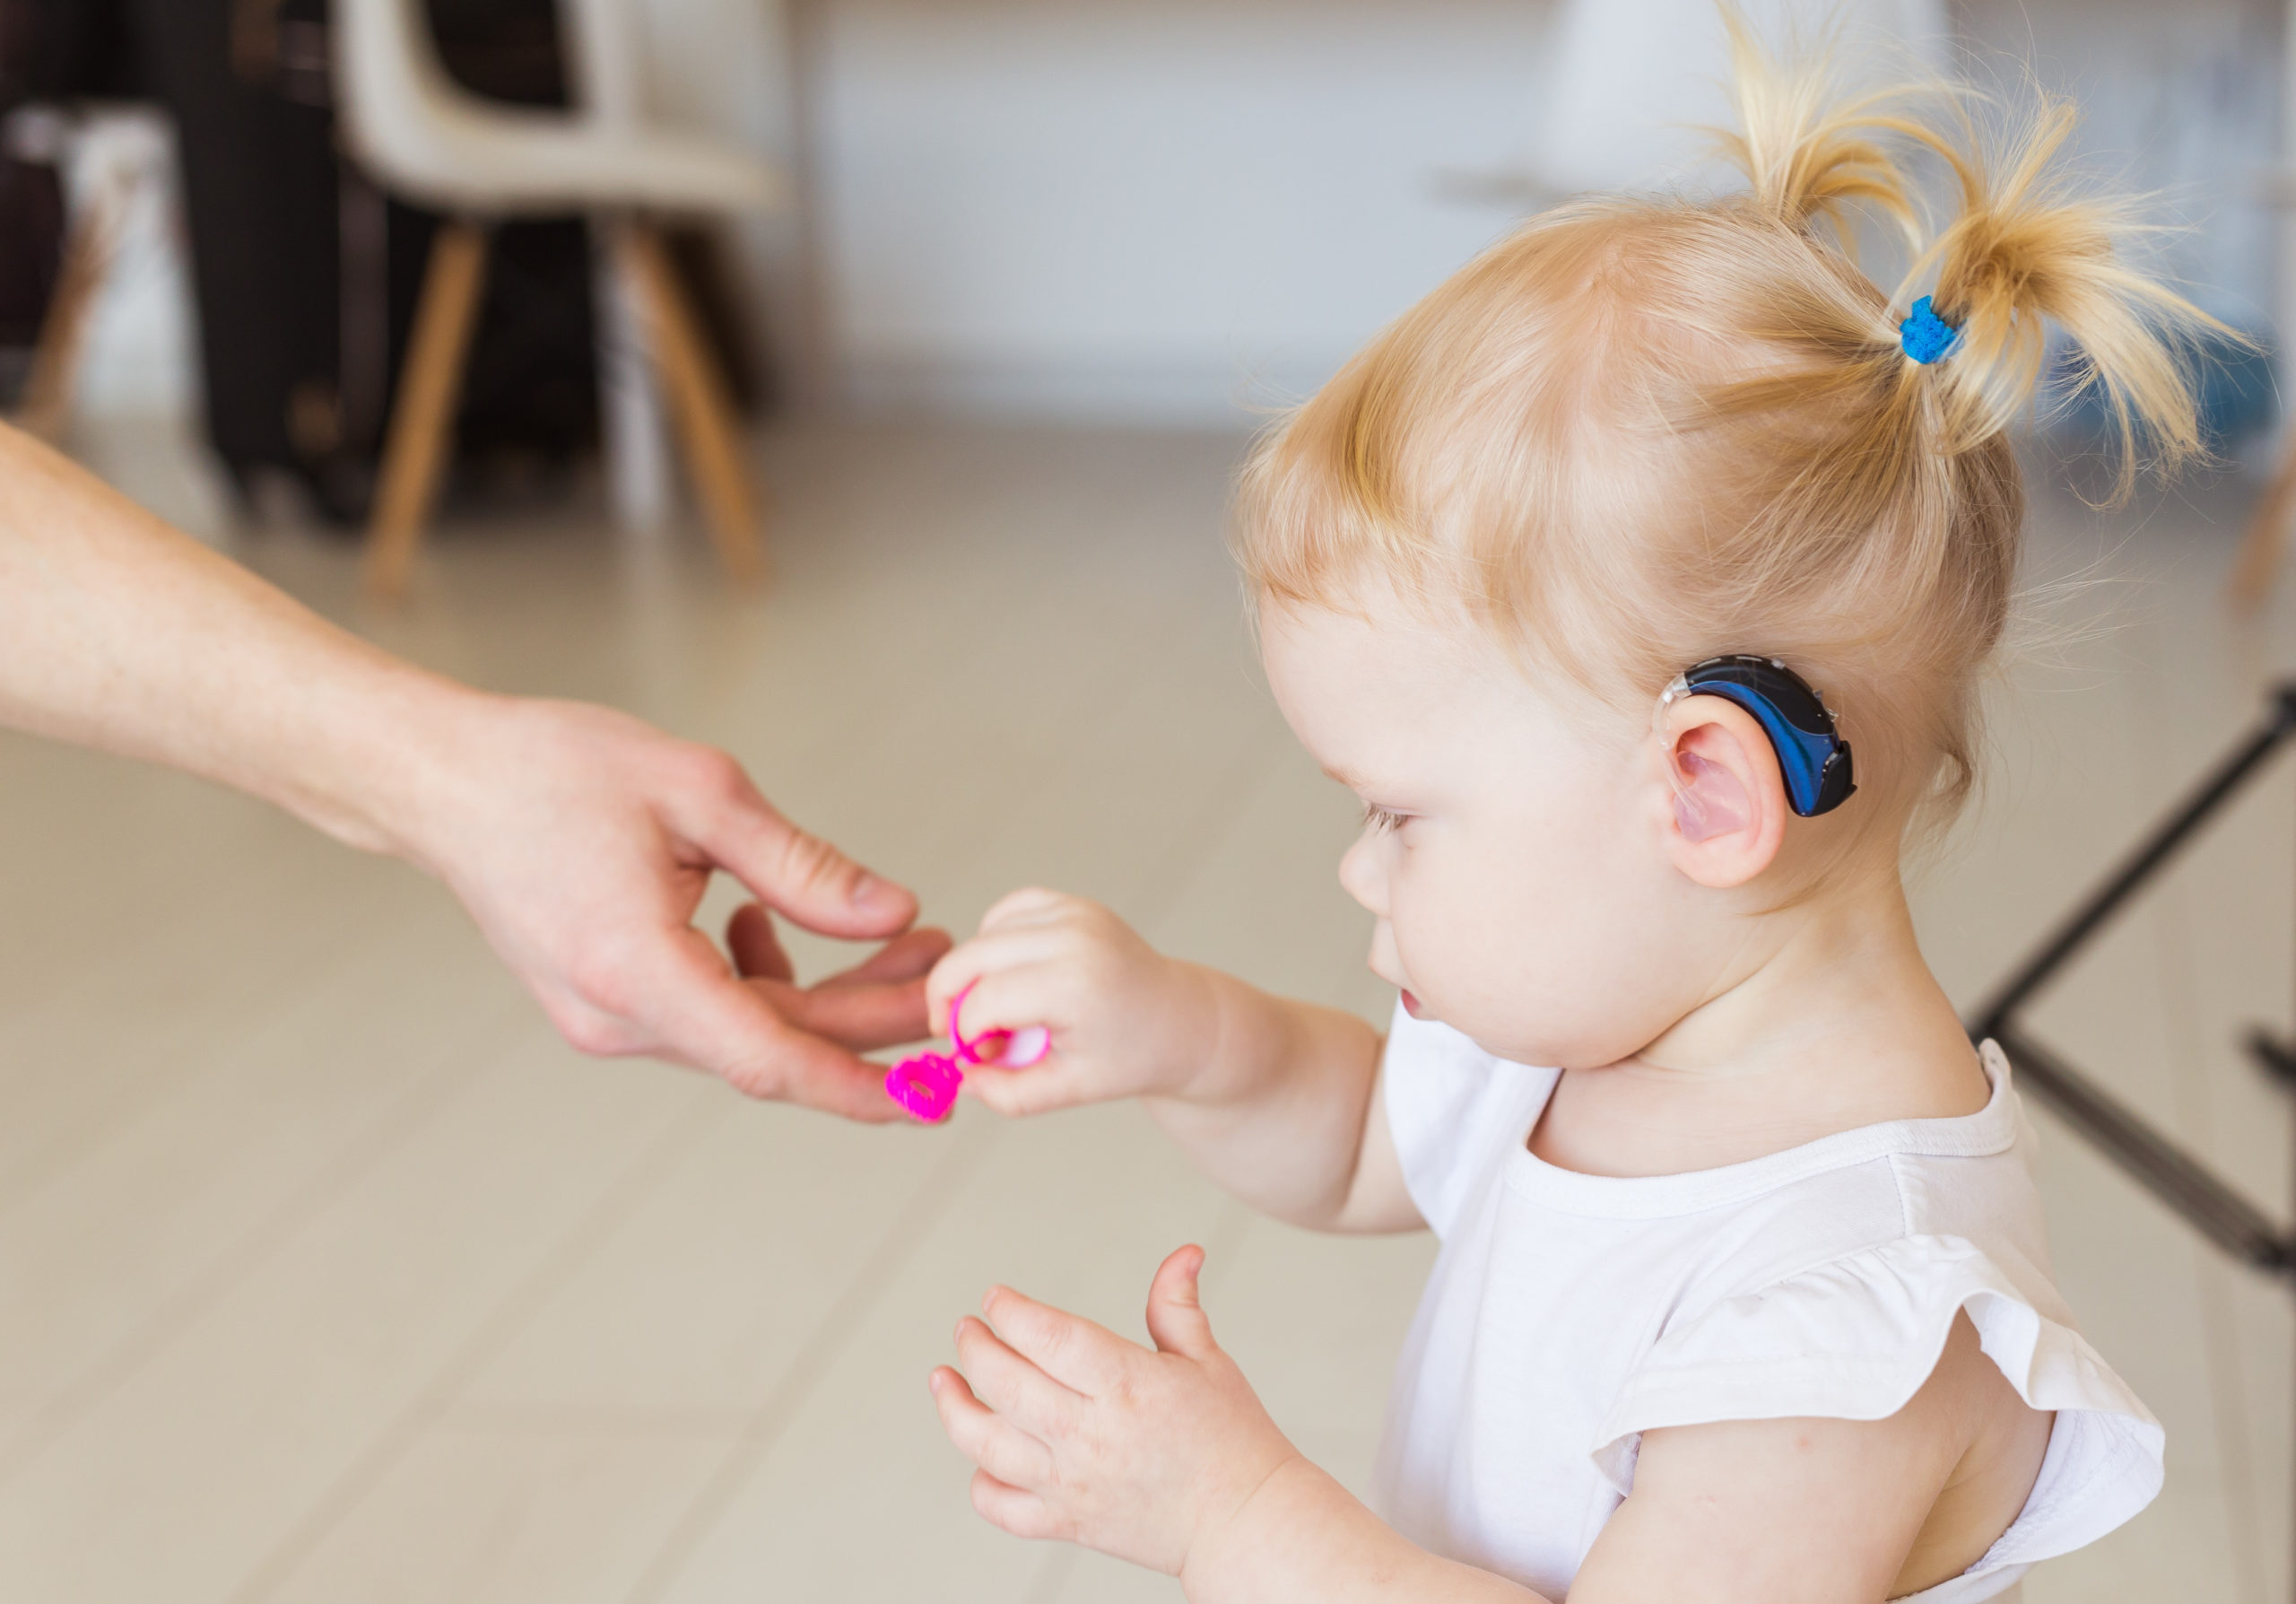 Hearing aid in baby girl's ear. Toddler child wearing a hearing aid at home. Disabled child, disability and deafness concept.